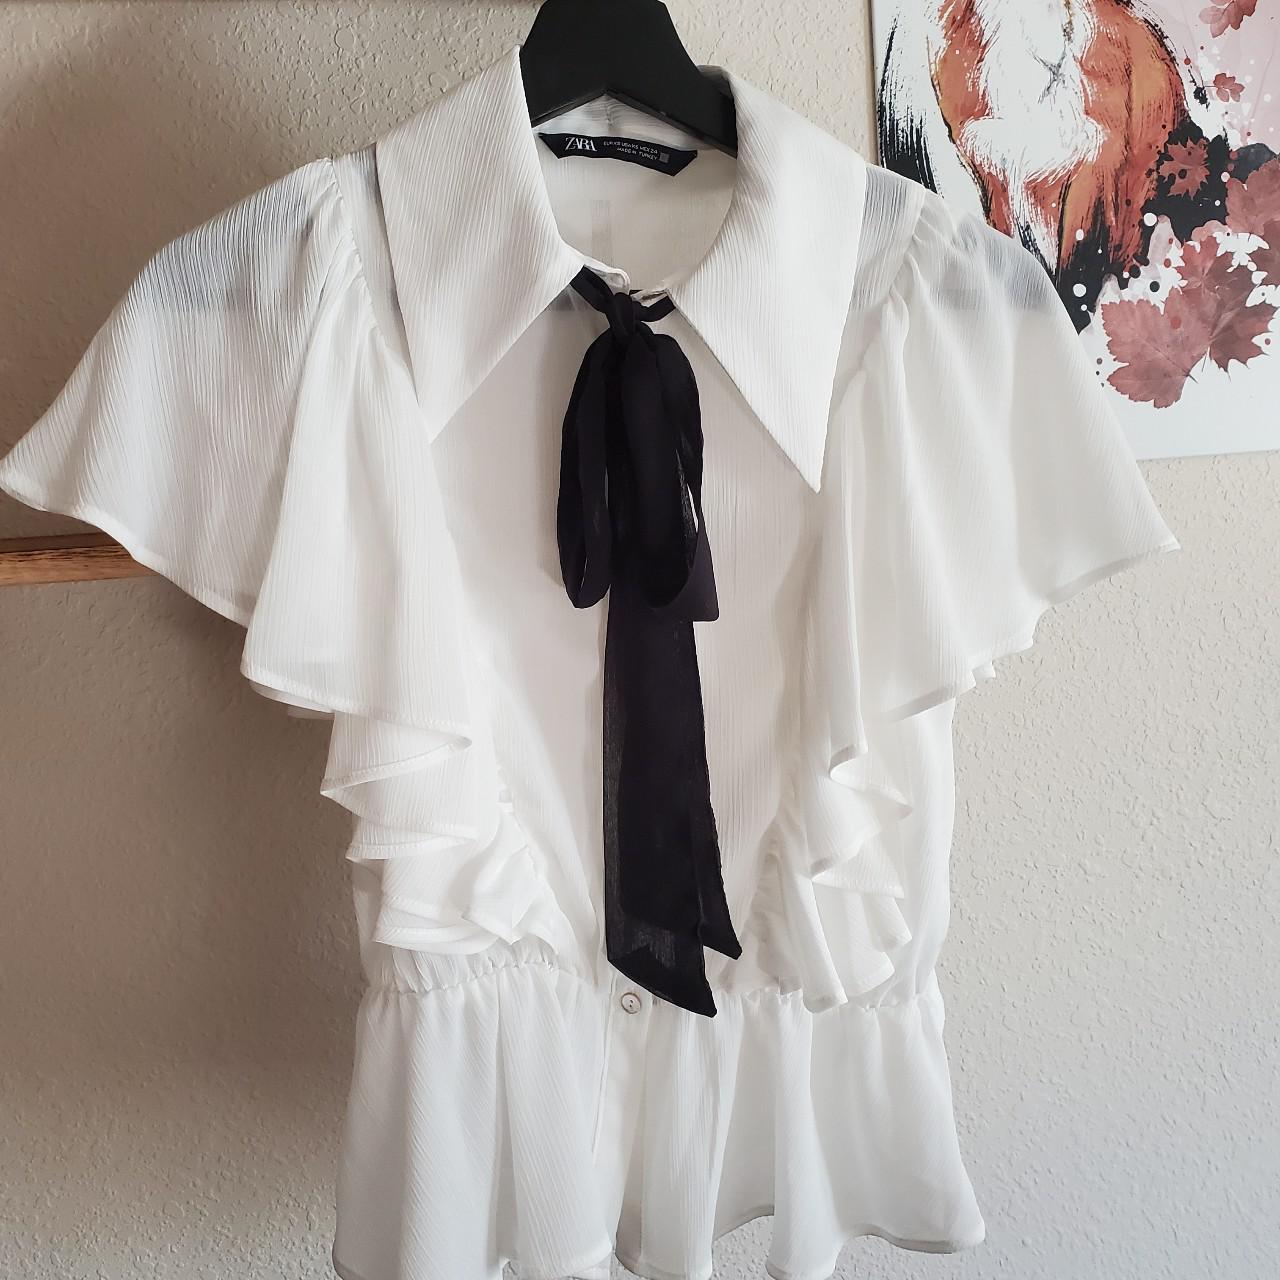 Zara Ruffled Blouse with Bow Oyster White Size XS - Depop